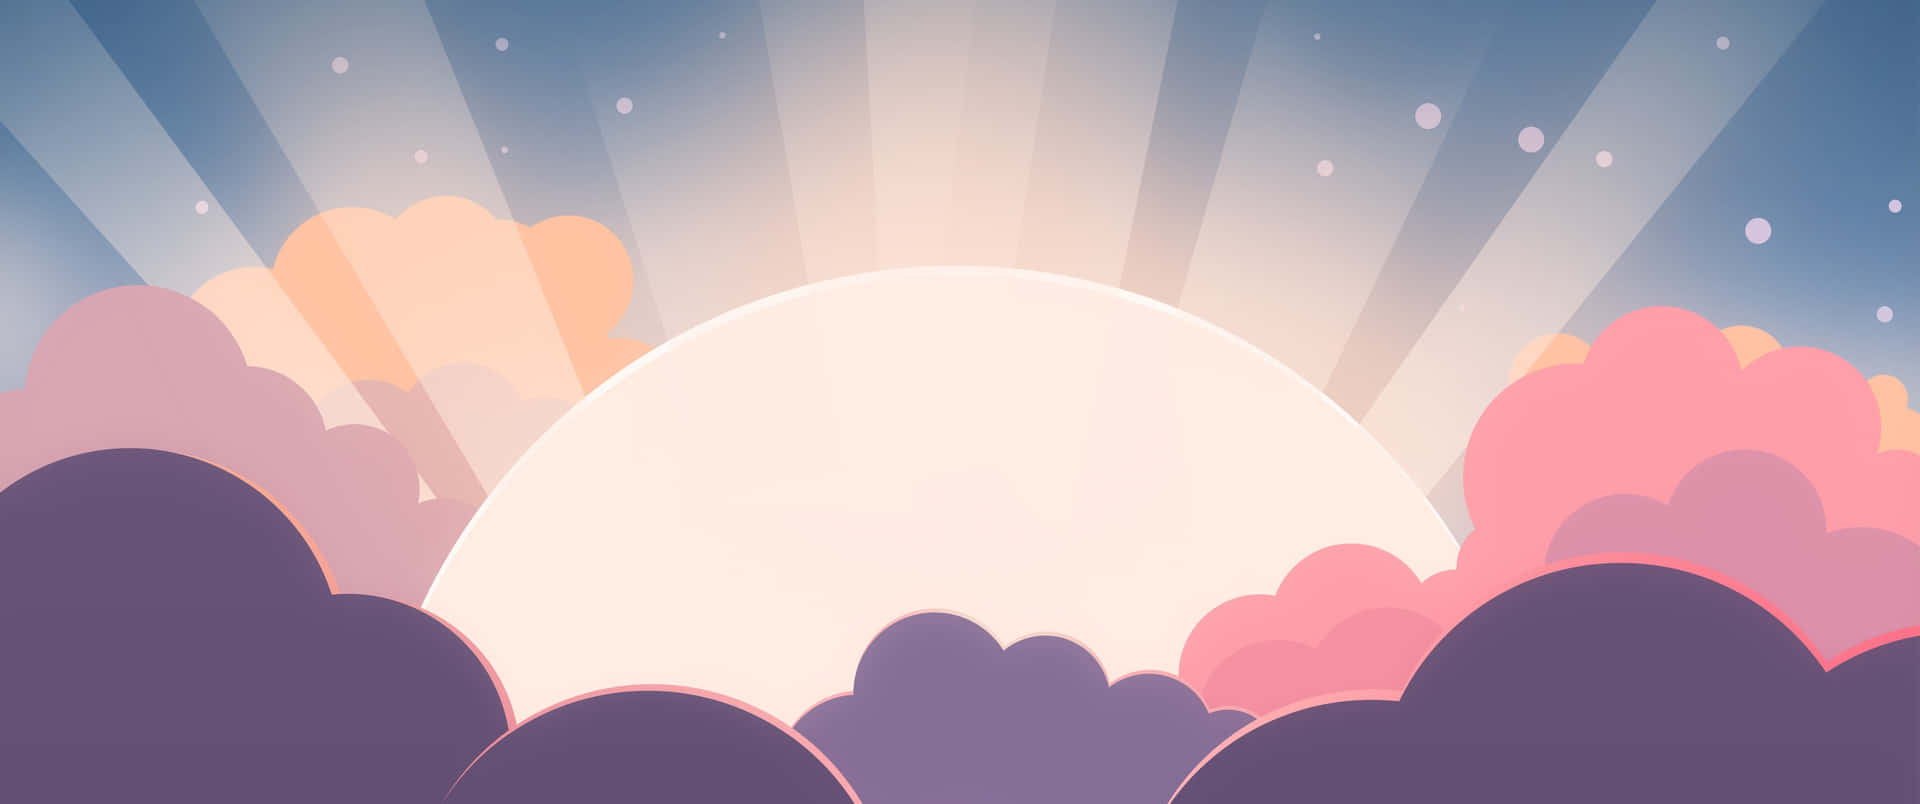 3440x1440p Vector Sun And Clouds Background